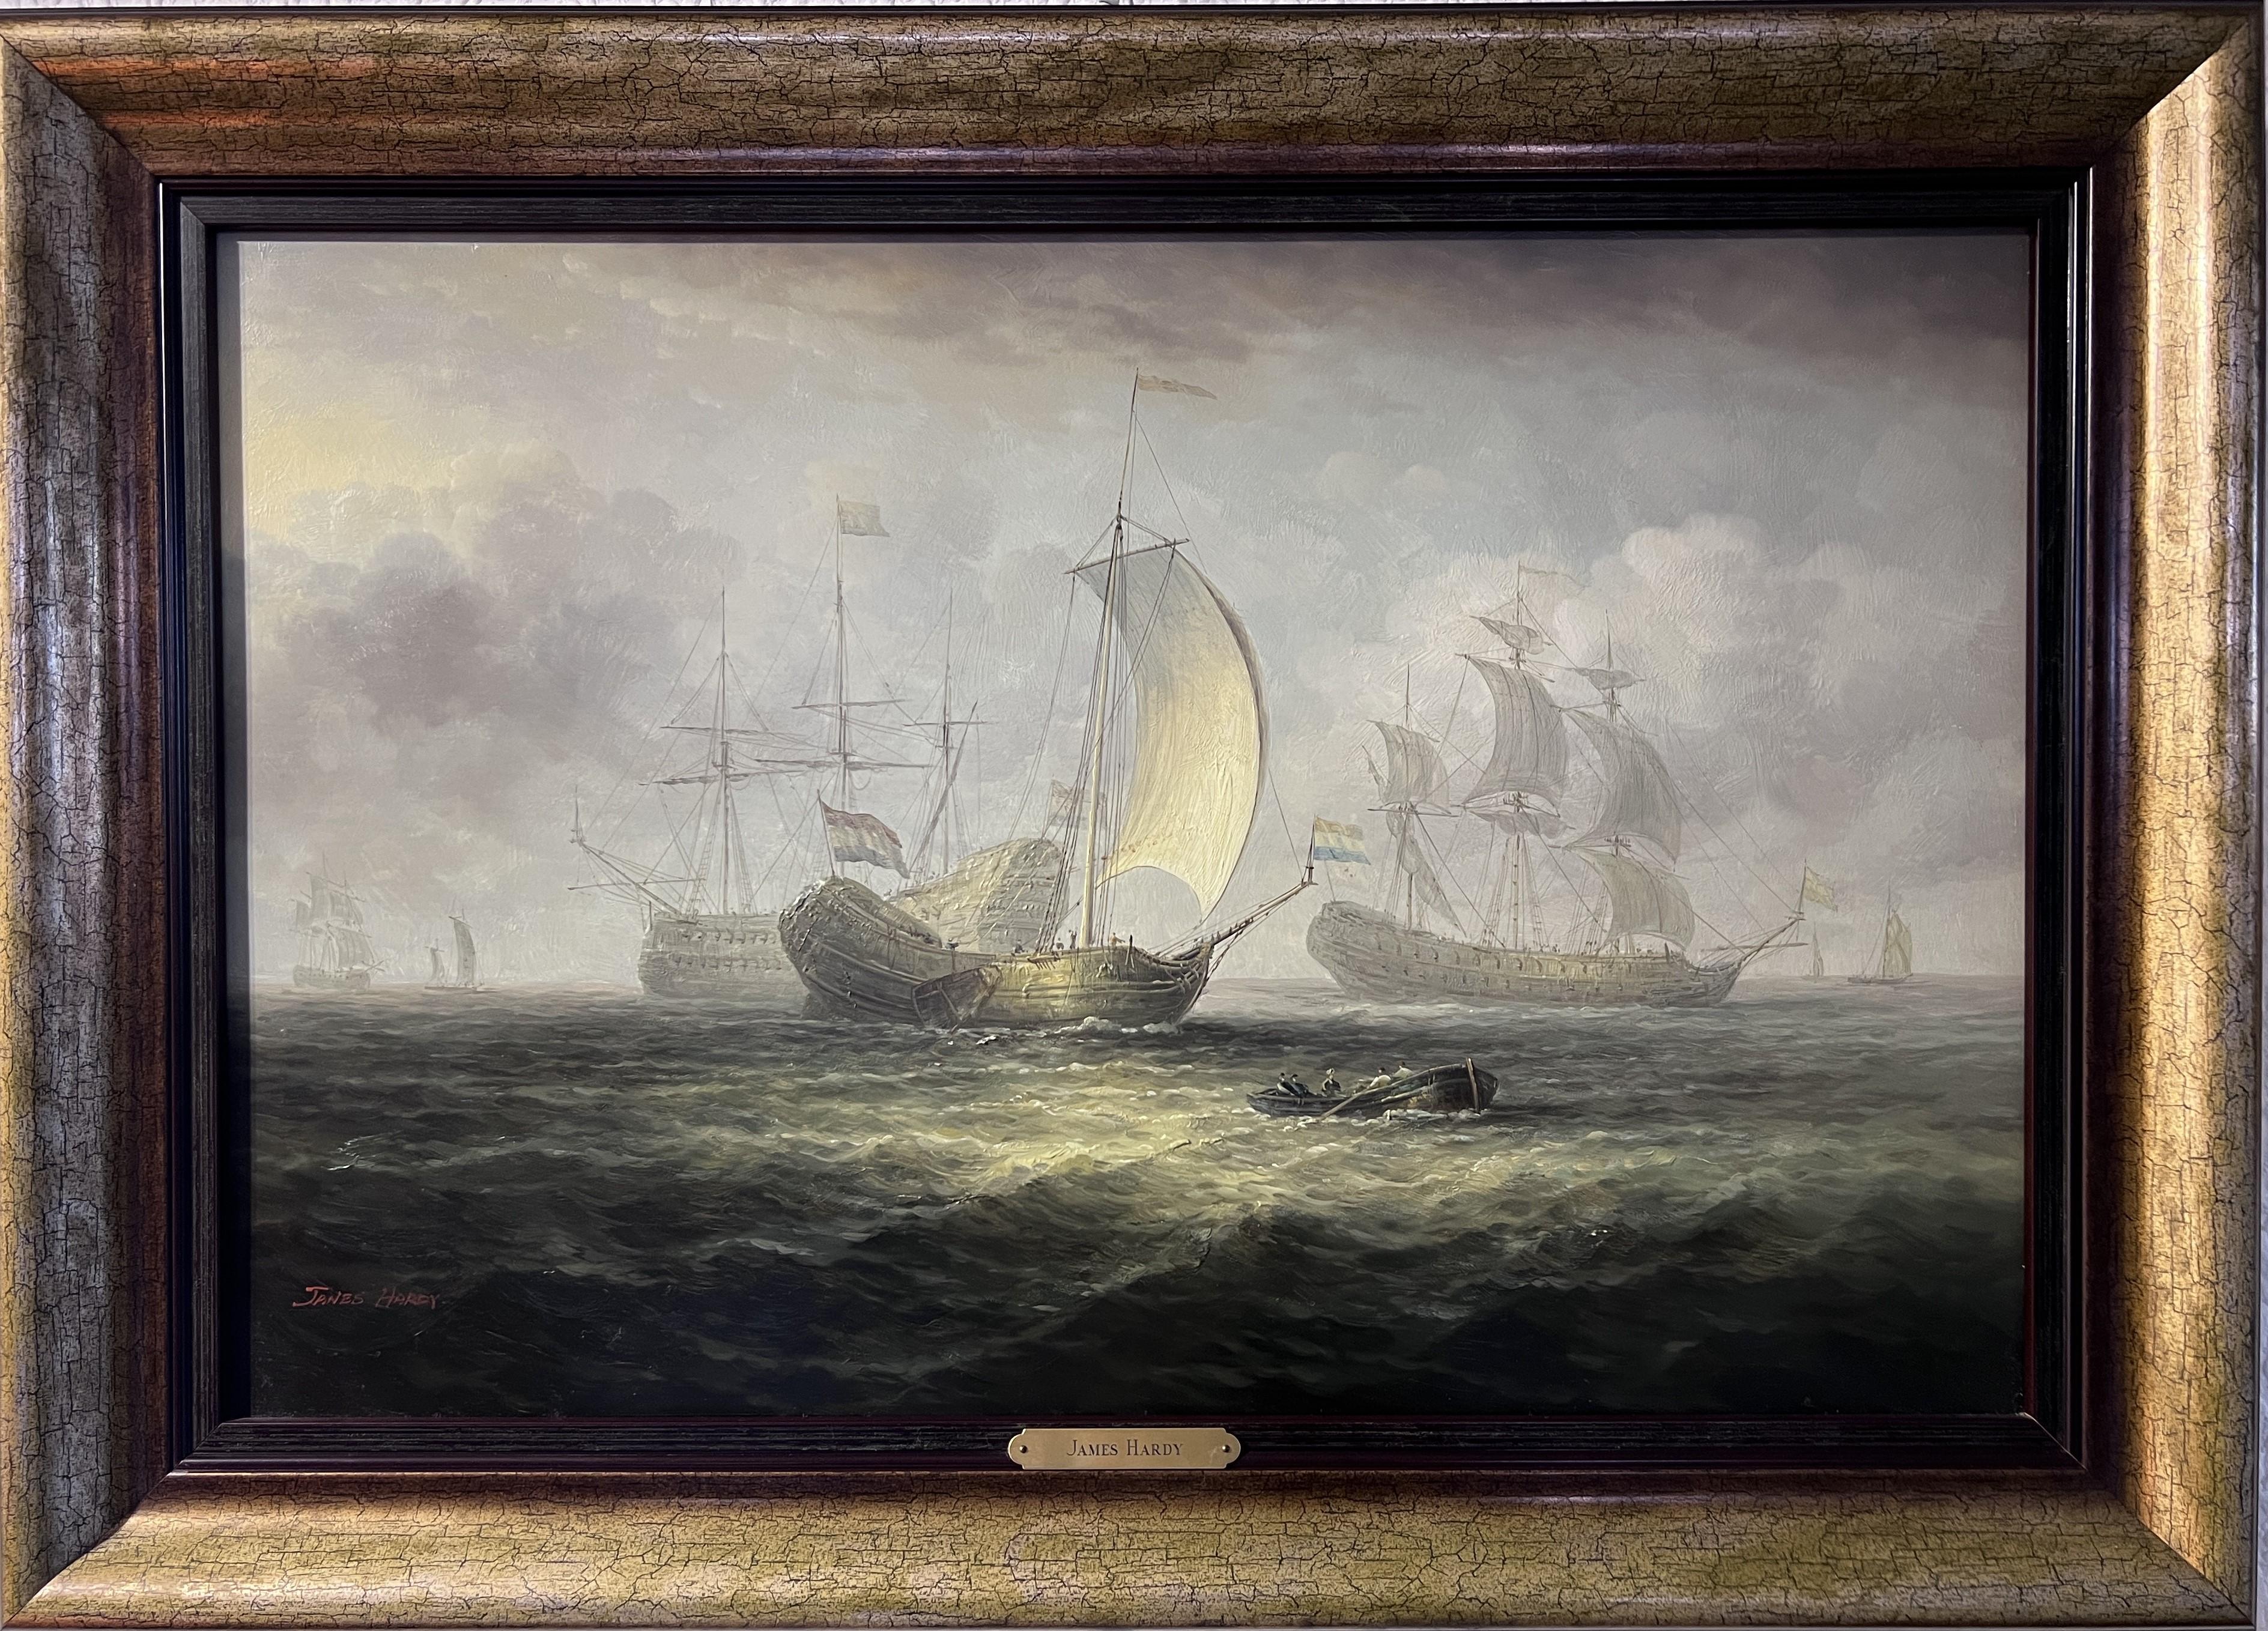 Up for sale gorgeous original vintage oil painting on wood panel/board depicting a maritime scene bustling with activity and dynamic interaction among various sailing vessels. 

The composition centers on a large ship with its sails fully unfurled,